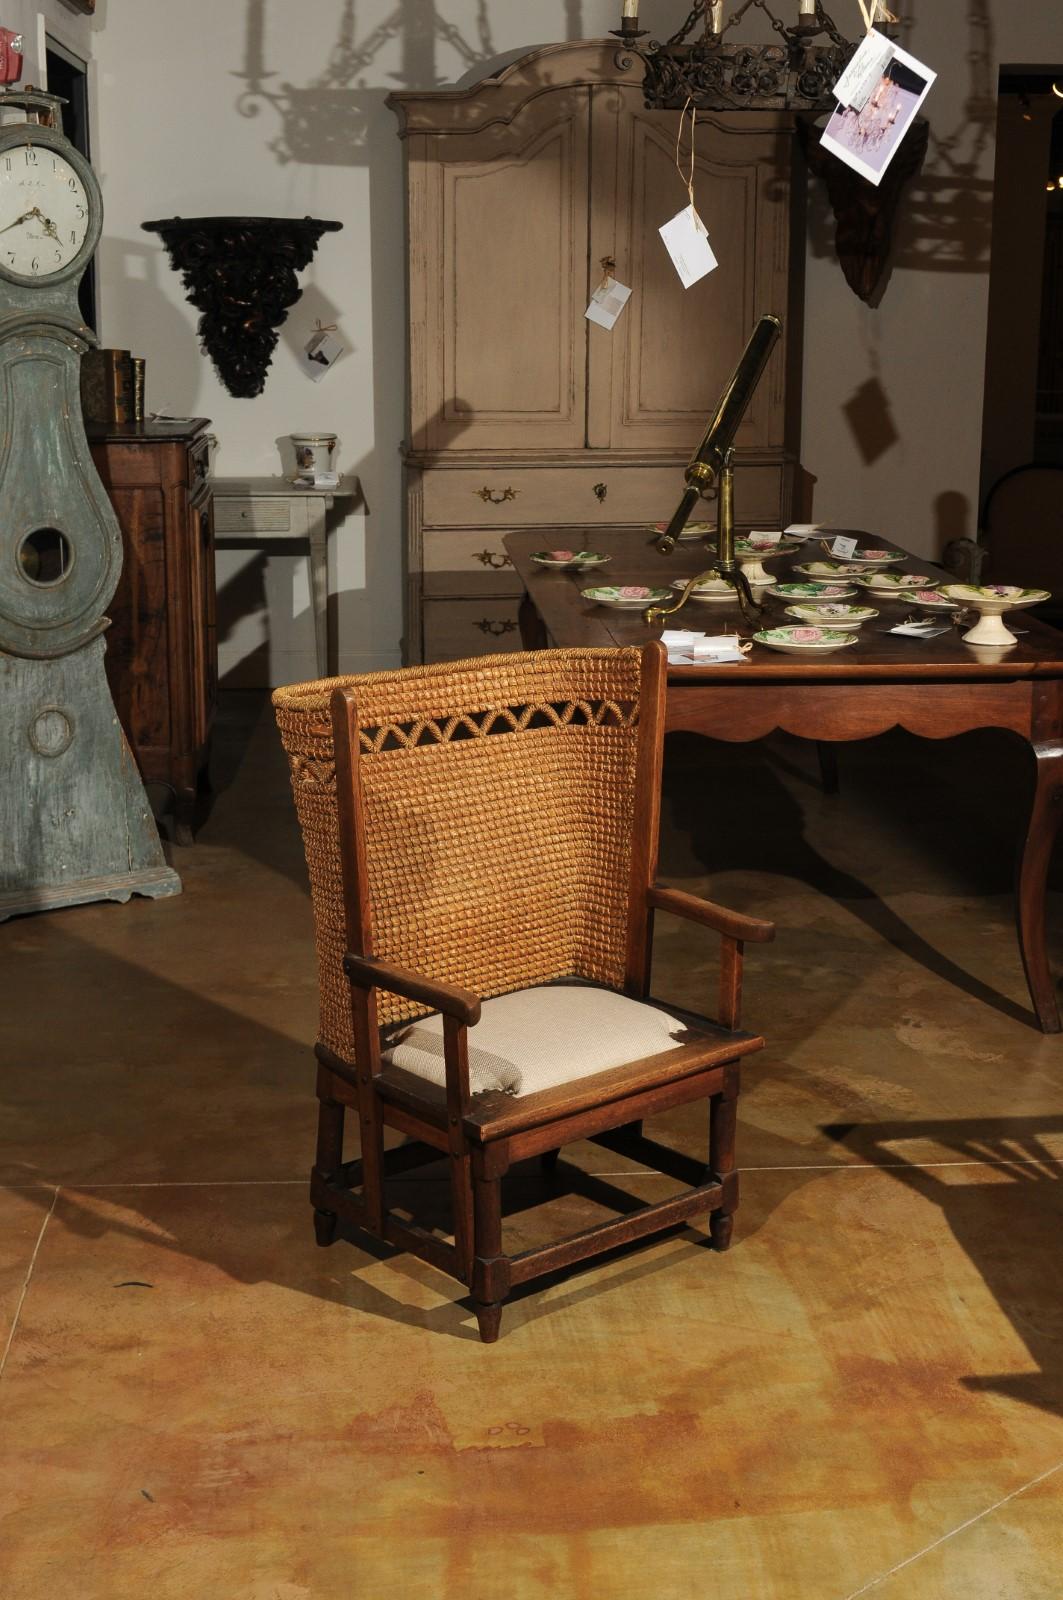 19th Century Scottish Orkney Chair with Handwoven Straw Back and Zigzag Patterns 3